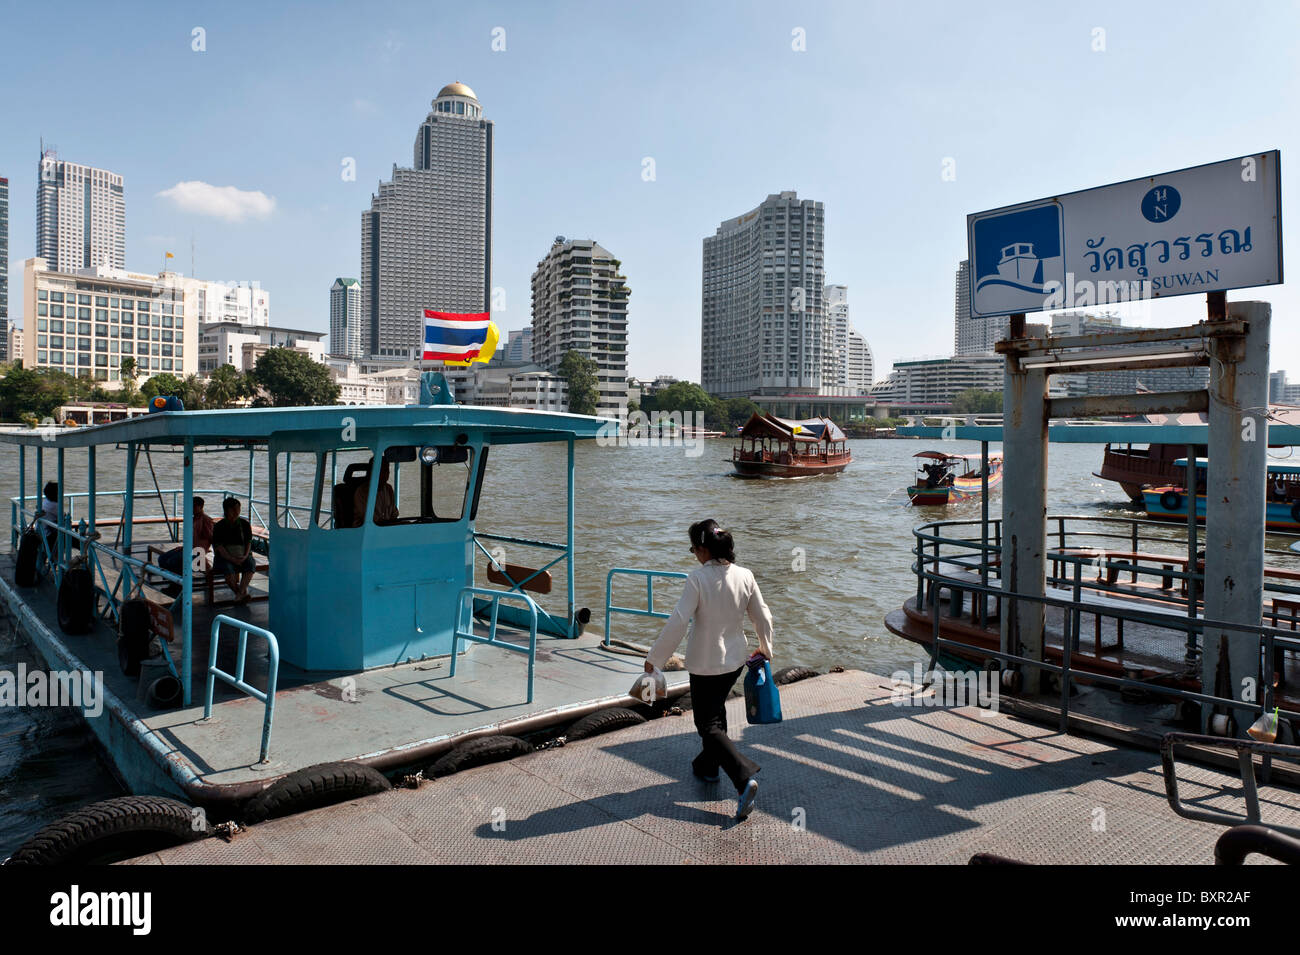 The Chao Phraya river is the royal river cutting through Bangkok and full of different types of boats and other river transport. Stock Photo